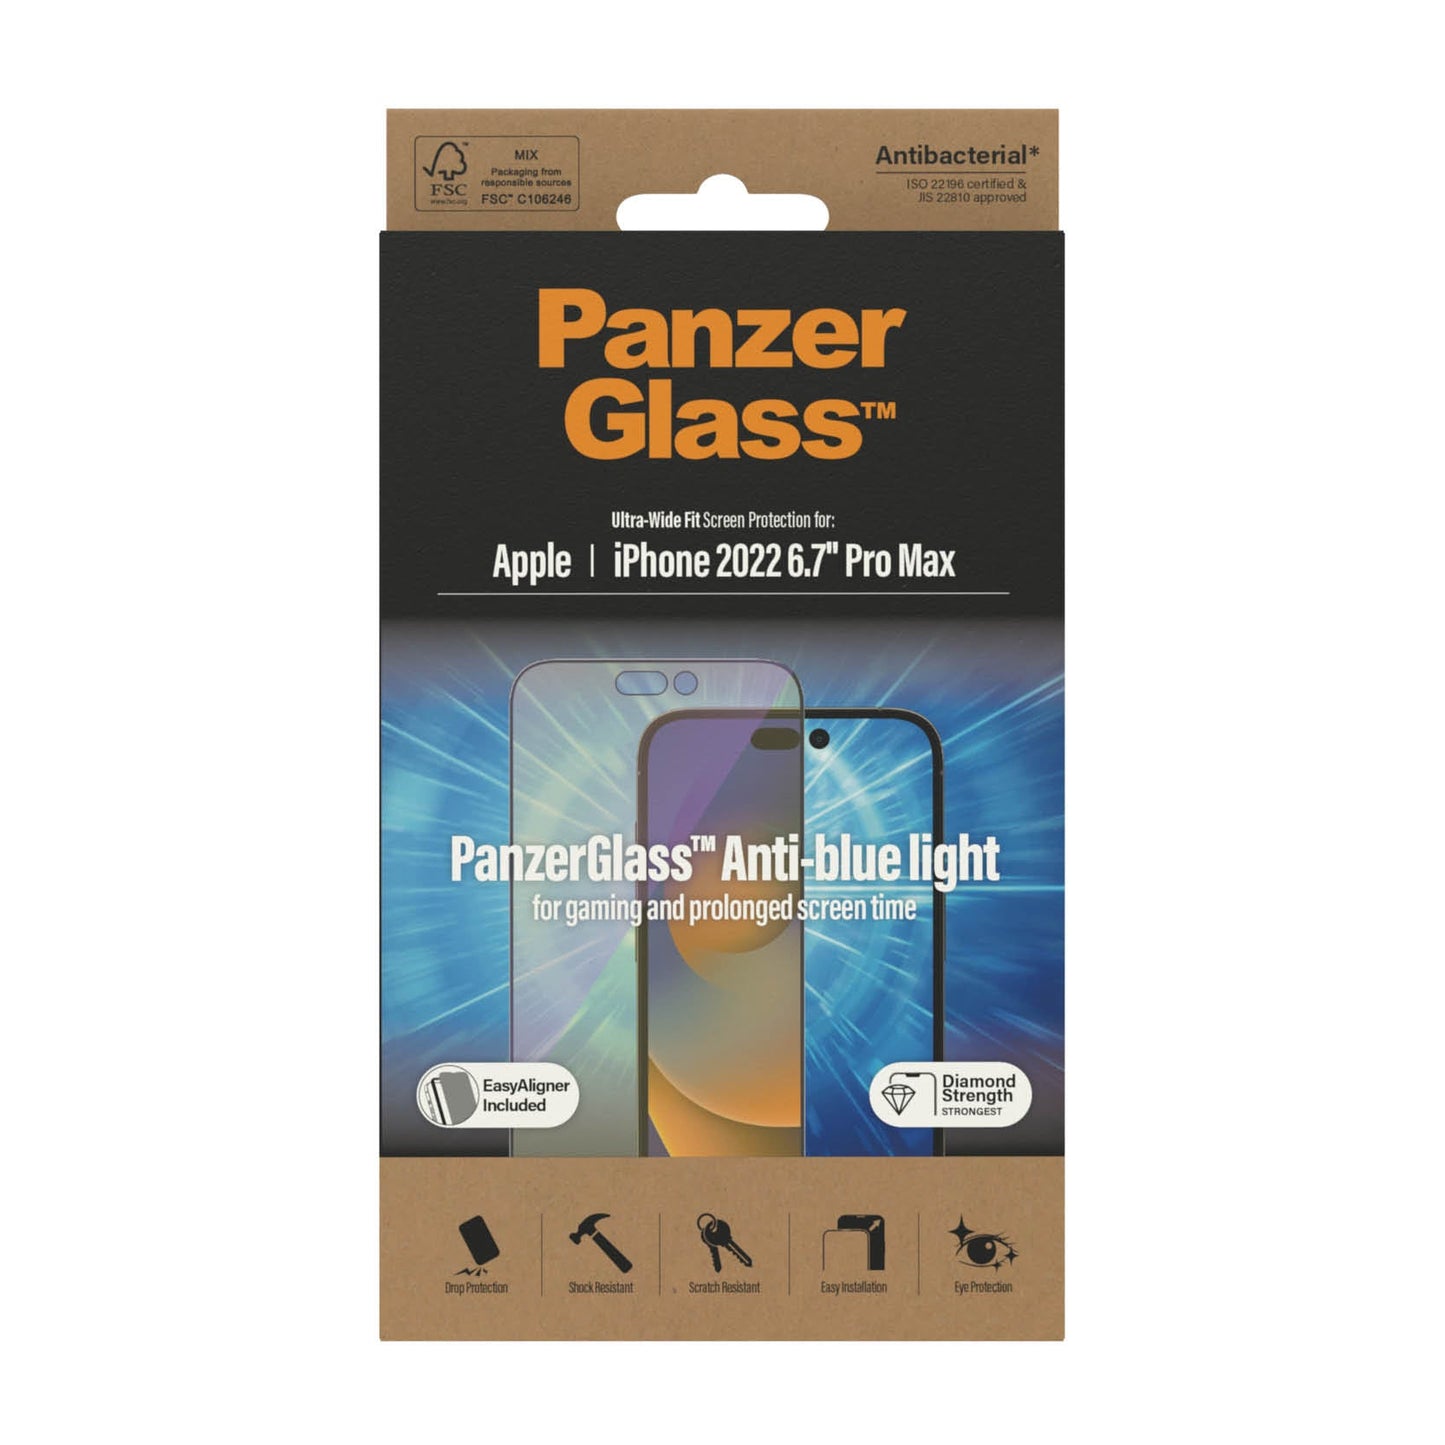 PanzerGlass™ Anti-blue Lgiht Ultra-Wide Fit Screen Protector for iPhone 14 Pro Max - Anti-blue Light